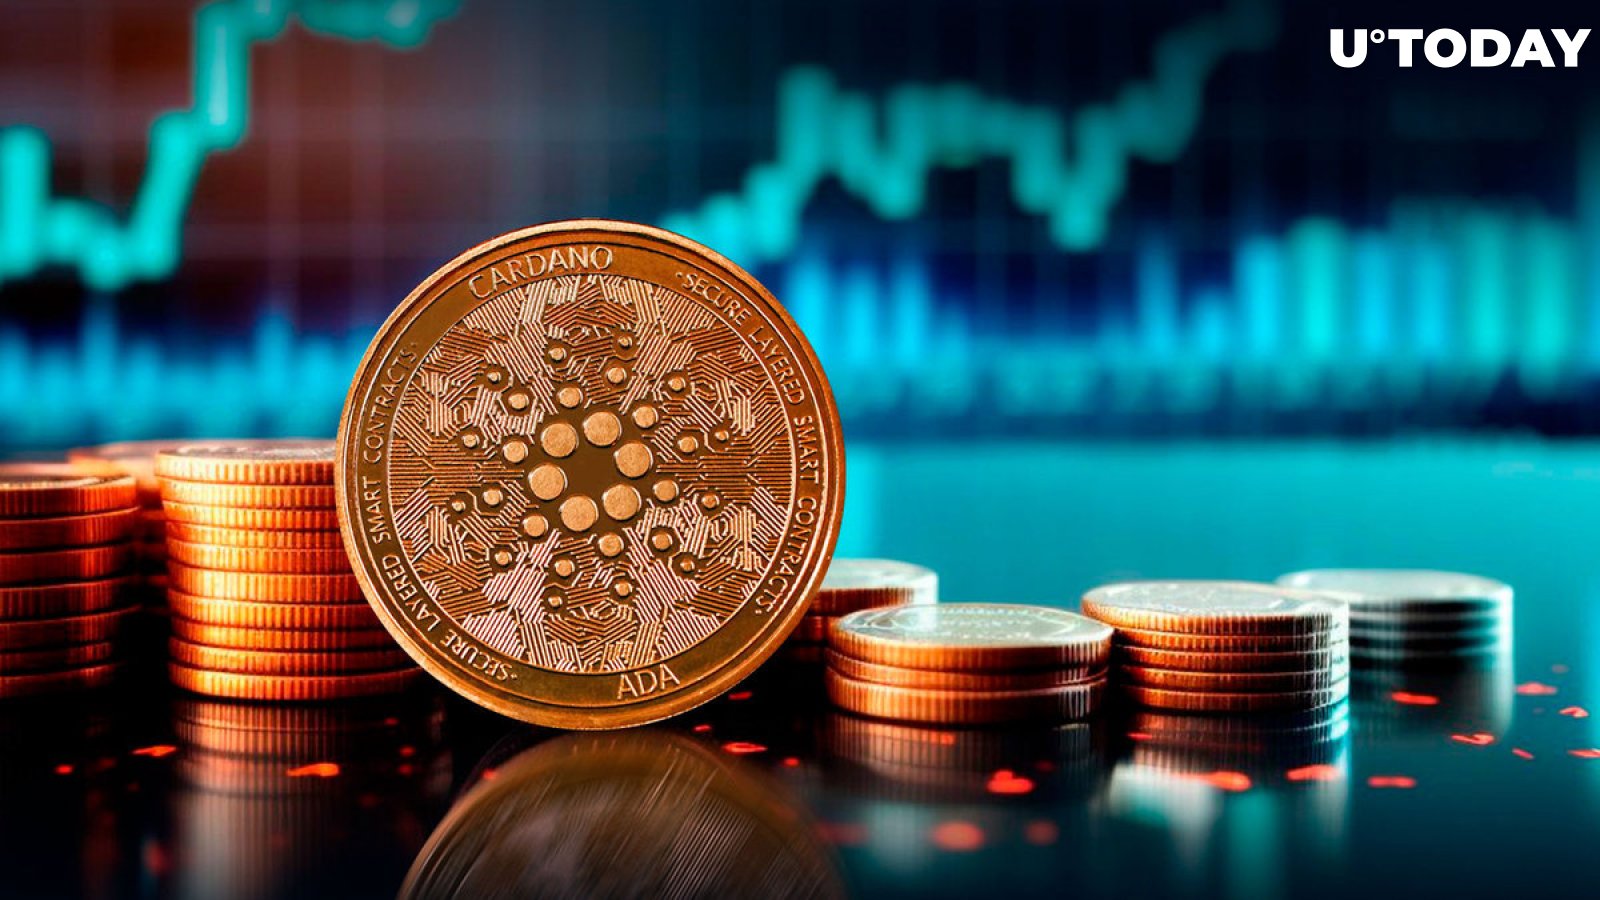 Cardano Sees Explosive 1,016% Surge in Fund Inflows, While ADA Price Targets $0.68